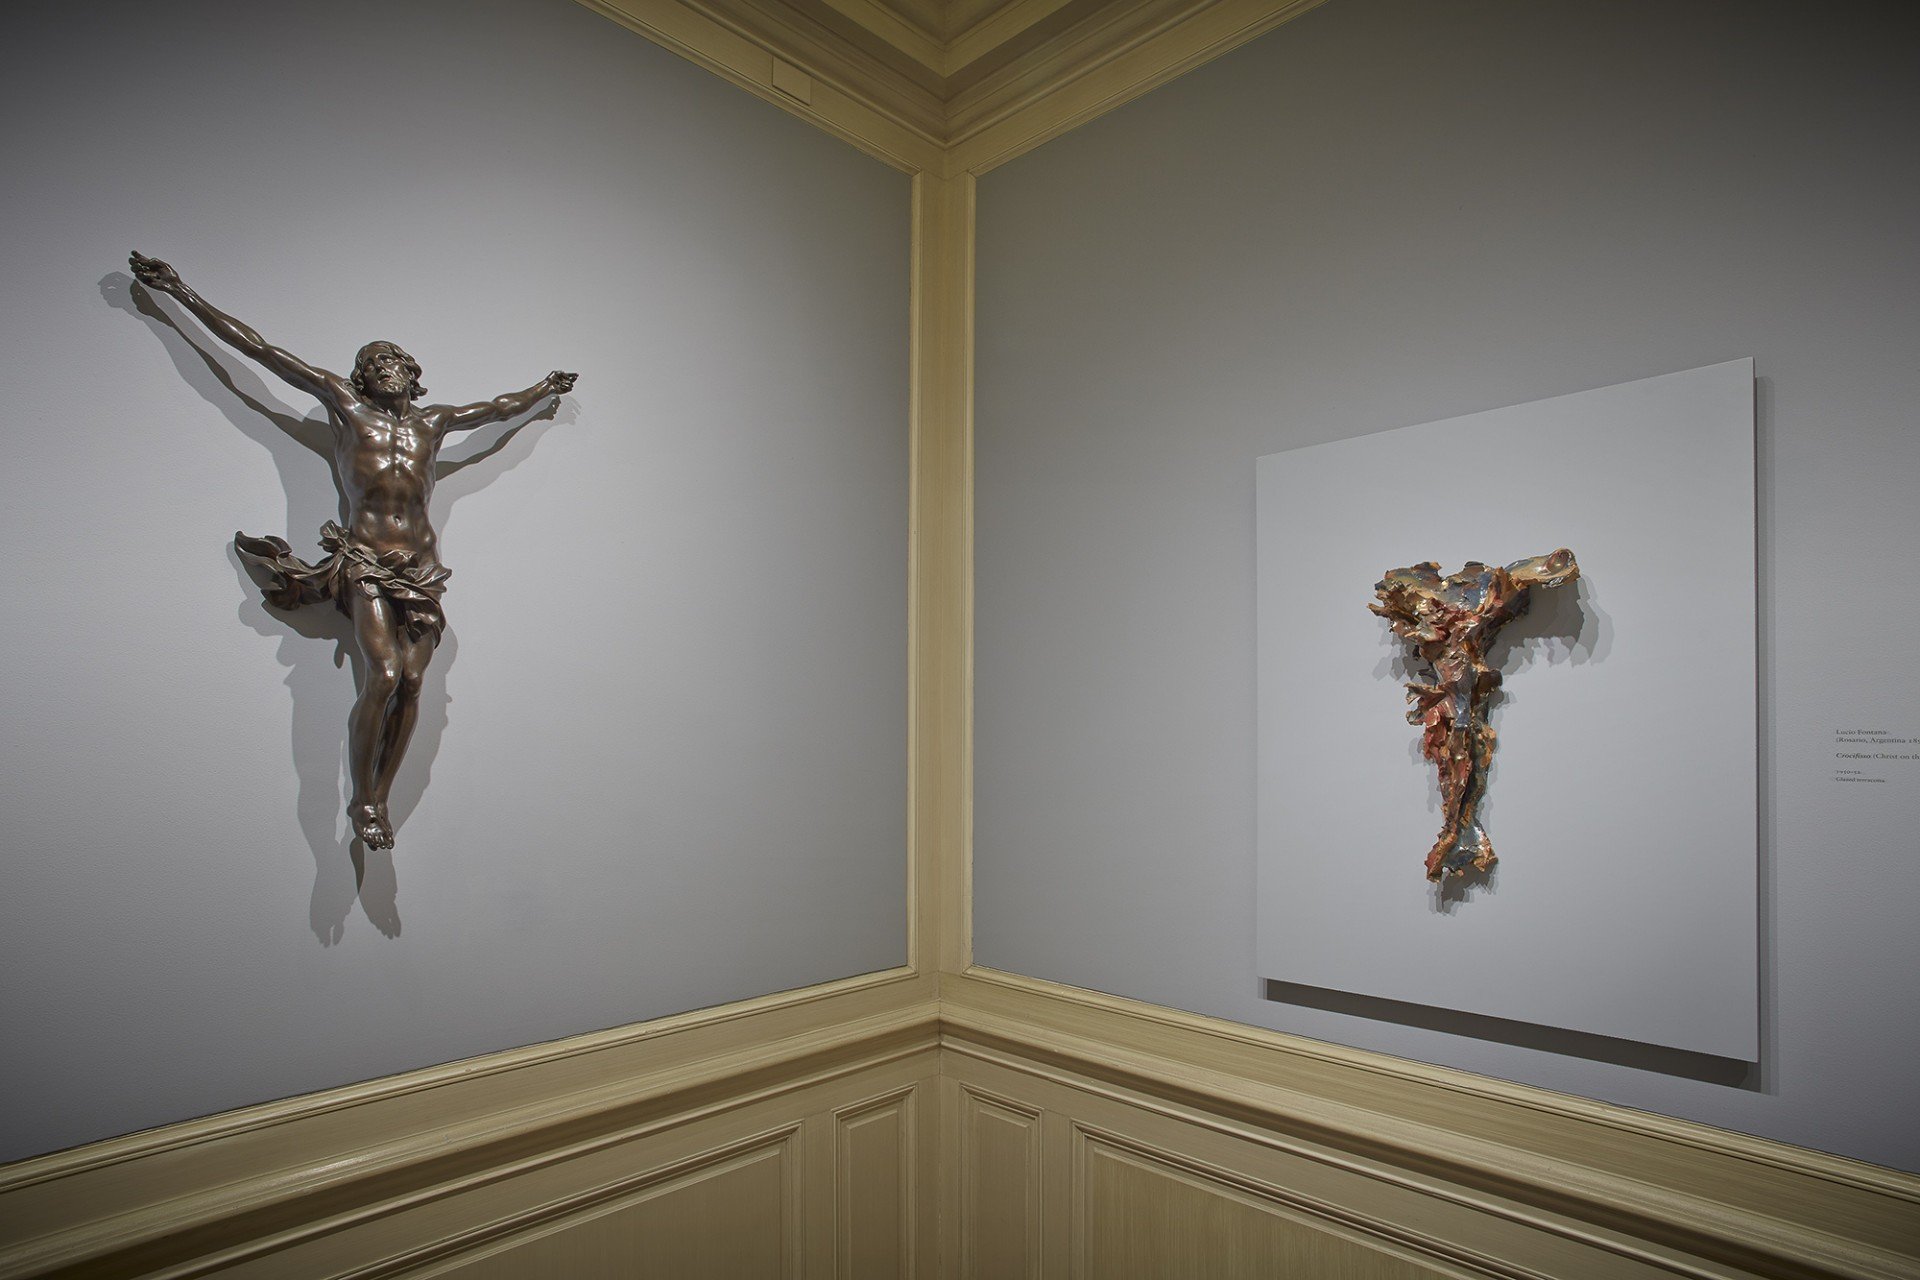 Installation view showing a pairing in the Frick's Cabinet gallery: Alessandro Algardi's Cristo Vivo (“The Living Christ on the Cross”), juxtaposed with Lucio Fontana's Crocifisso (“Christ on the Cross”), © Fondazione Lucio Fontana, Milan; photo: Michael Bodycomb